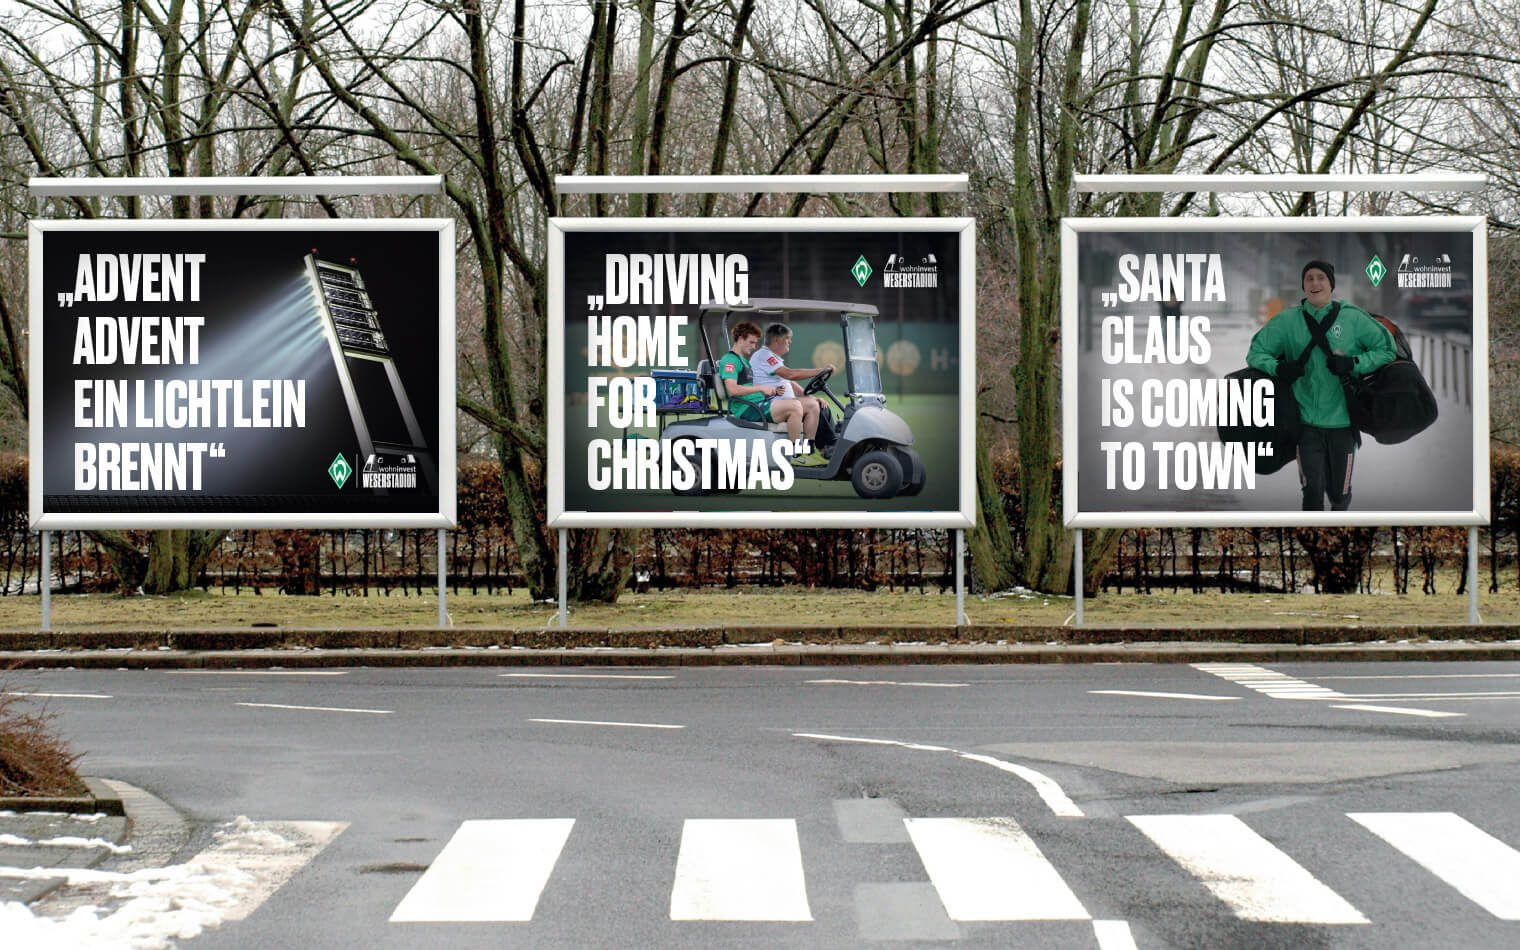 This picture shows a marketing campaign with Werder Bremen during the winter break of the Bundesliga